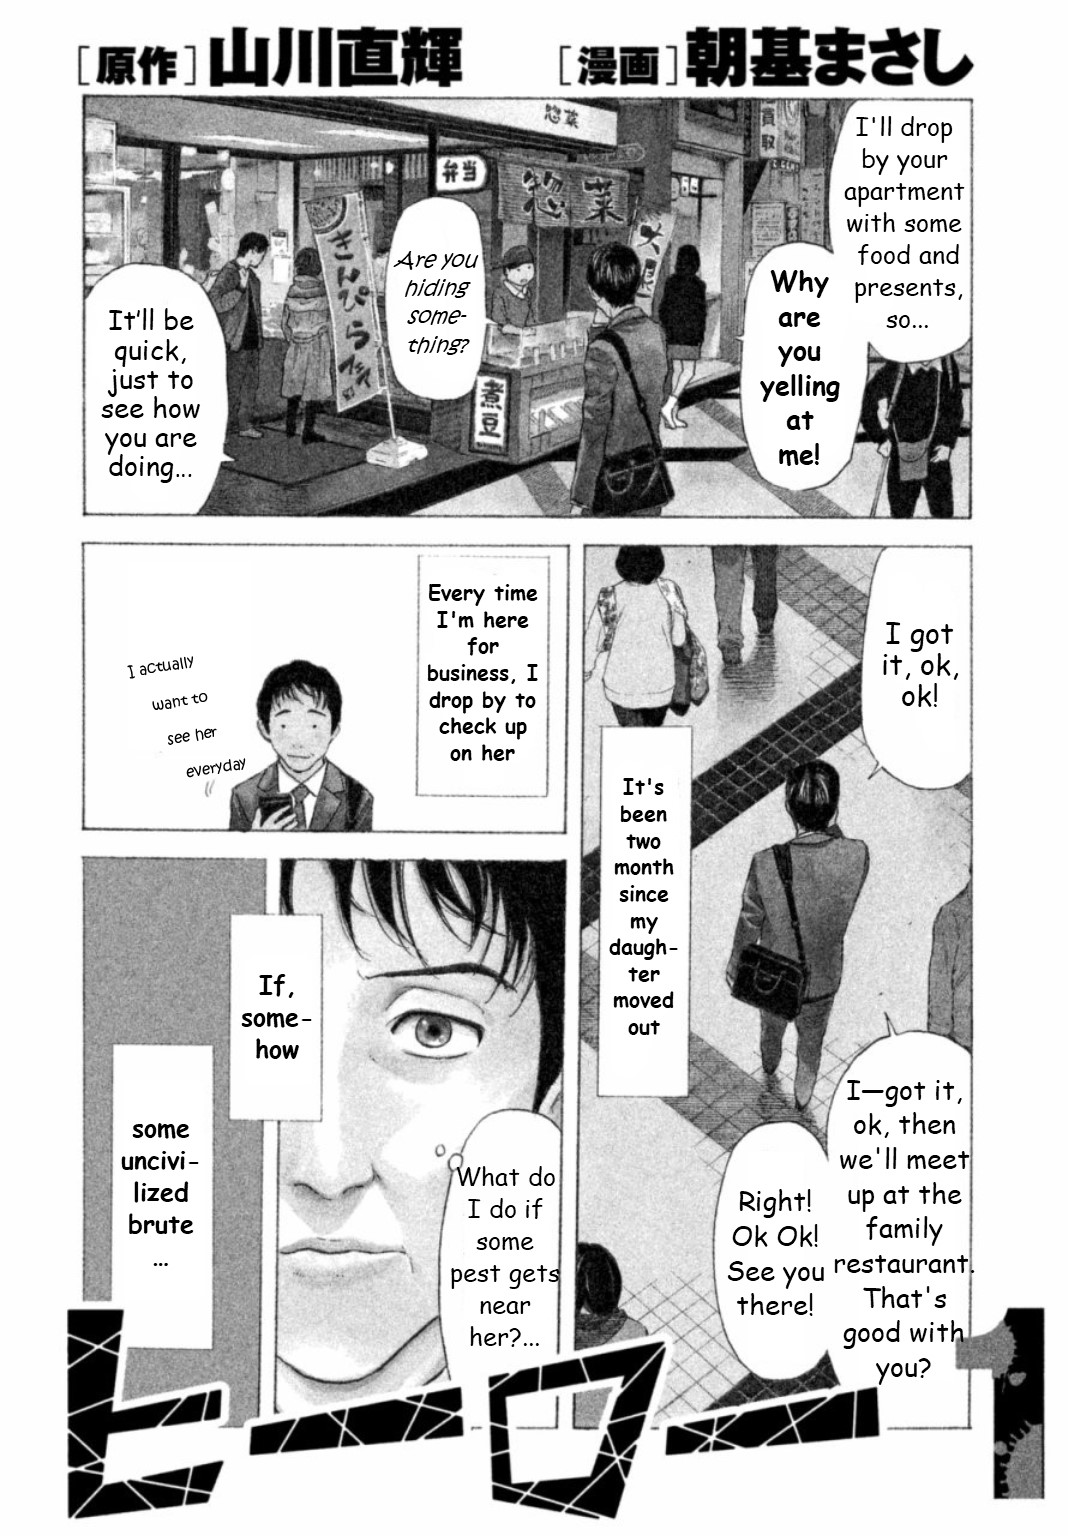 My Home Hero Vol. 1 Ch. 1 First Encounter with Daughter's Boyfriend